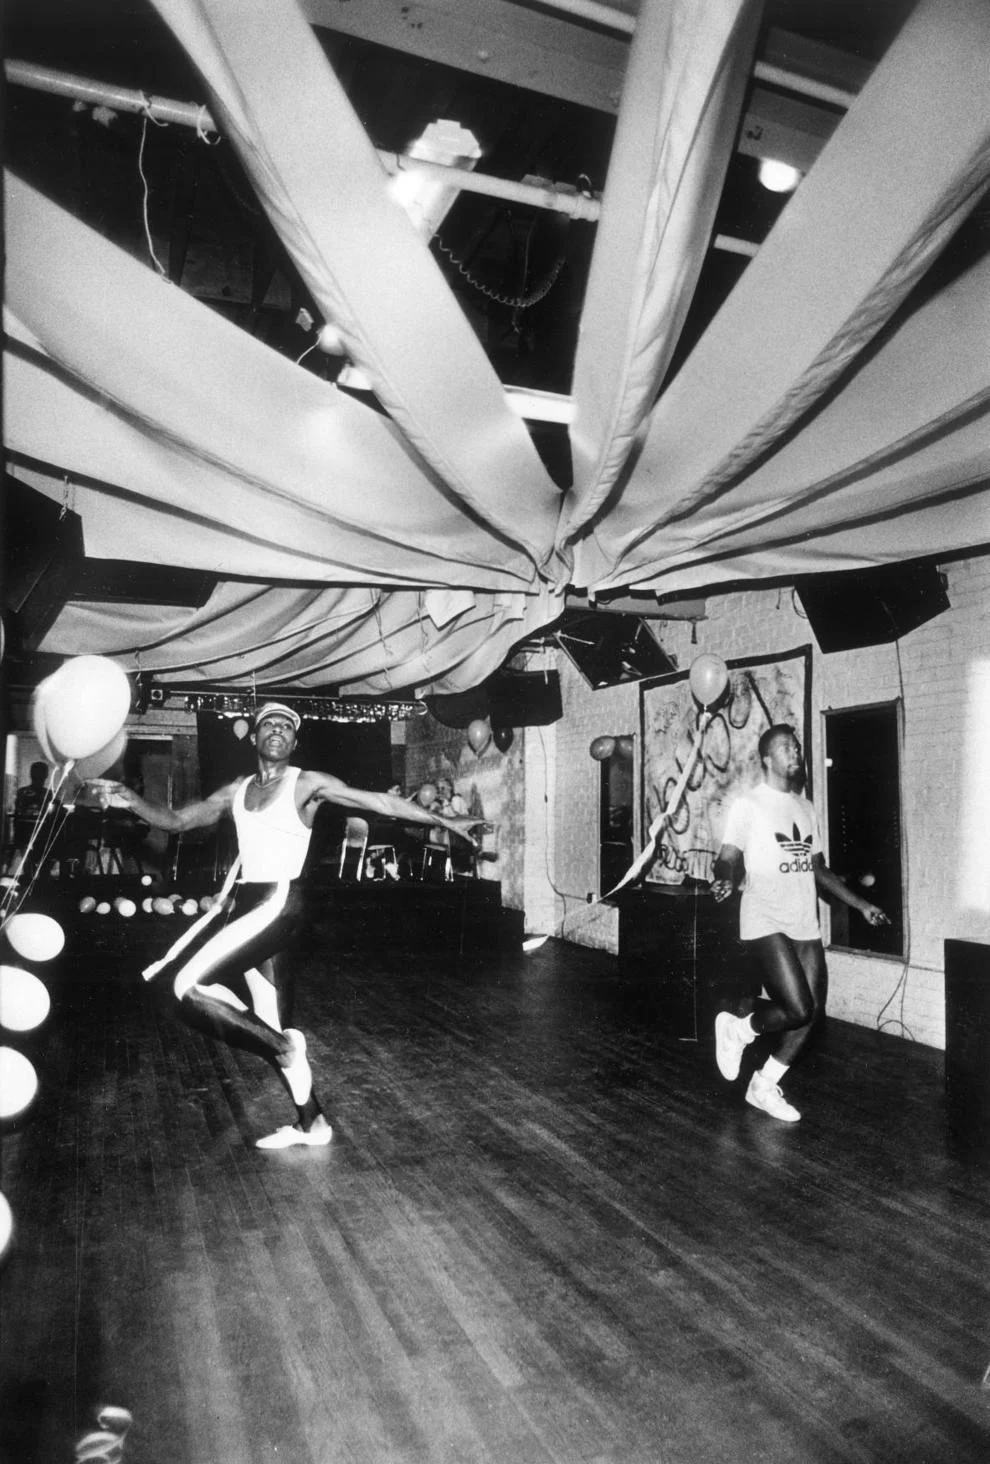 A quiet moment dance floor at the Pyramid Club, a bar on North Boulevard in Richmond, 1985